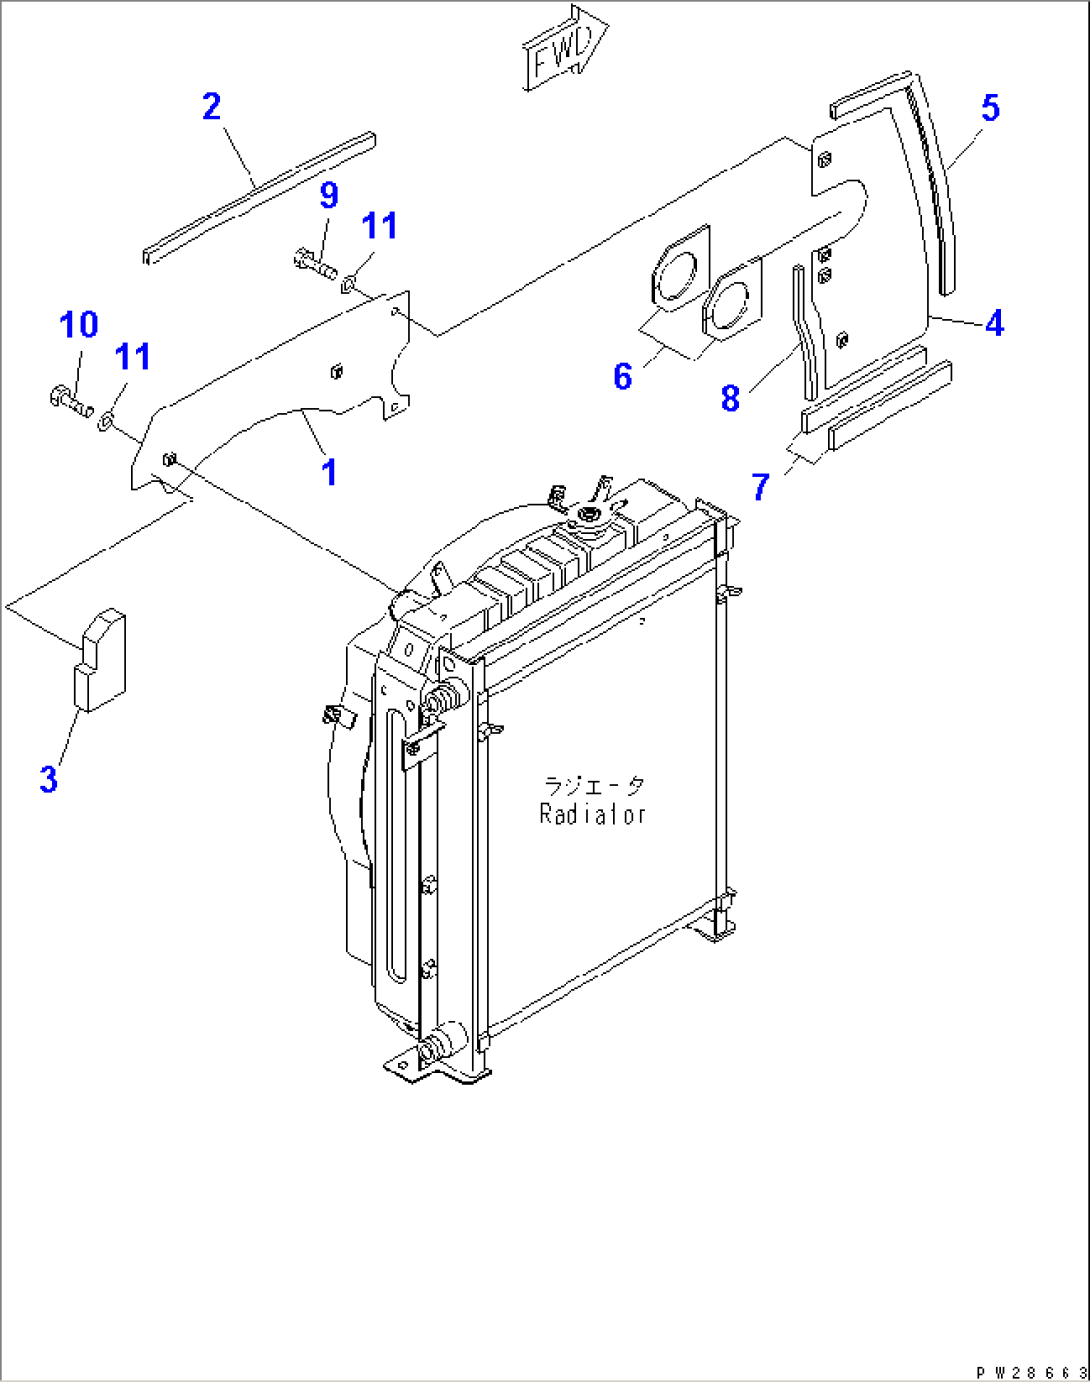 COOLING (SEAL PLATE)